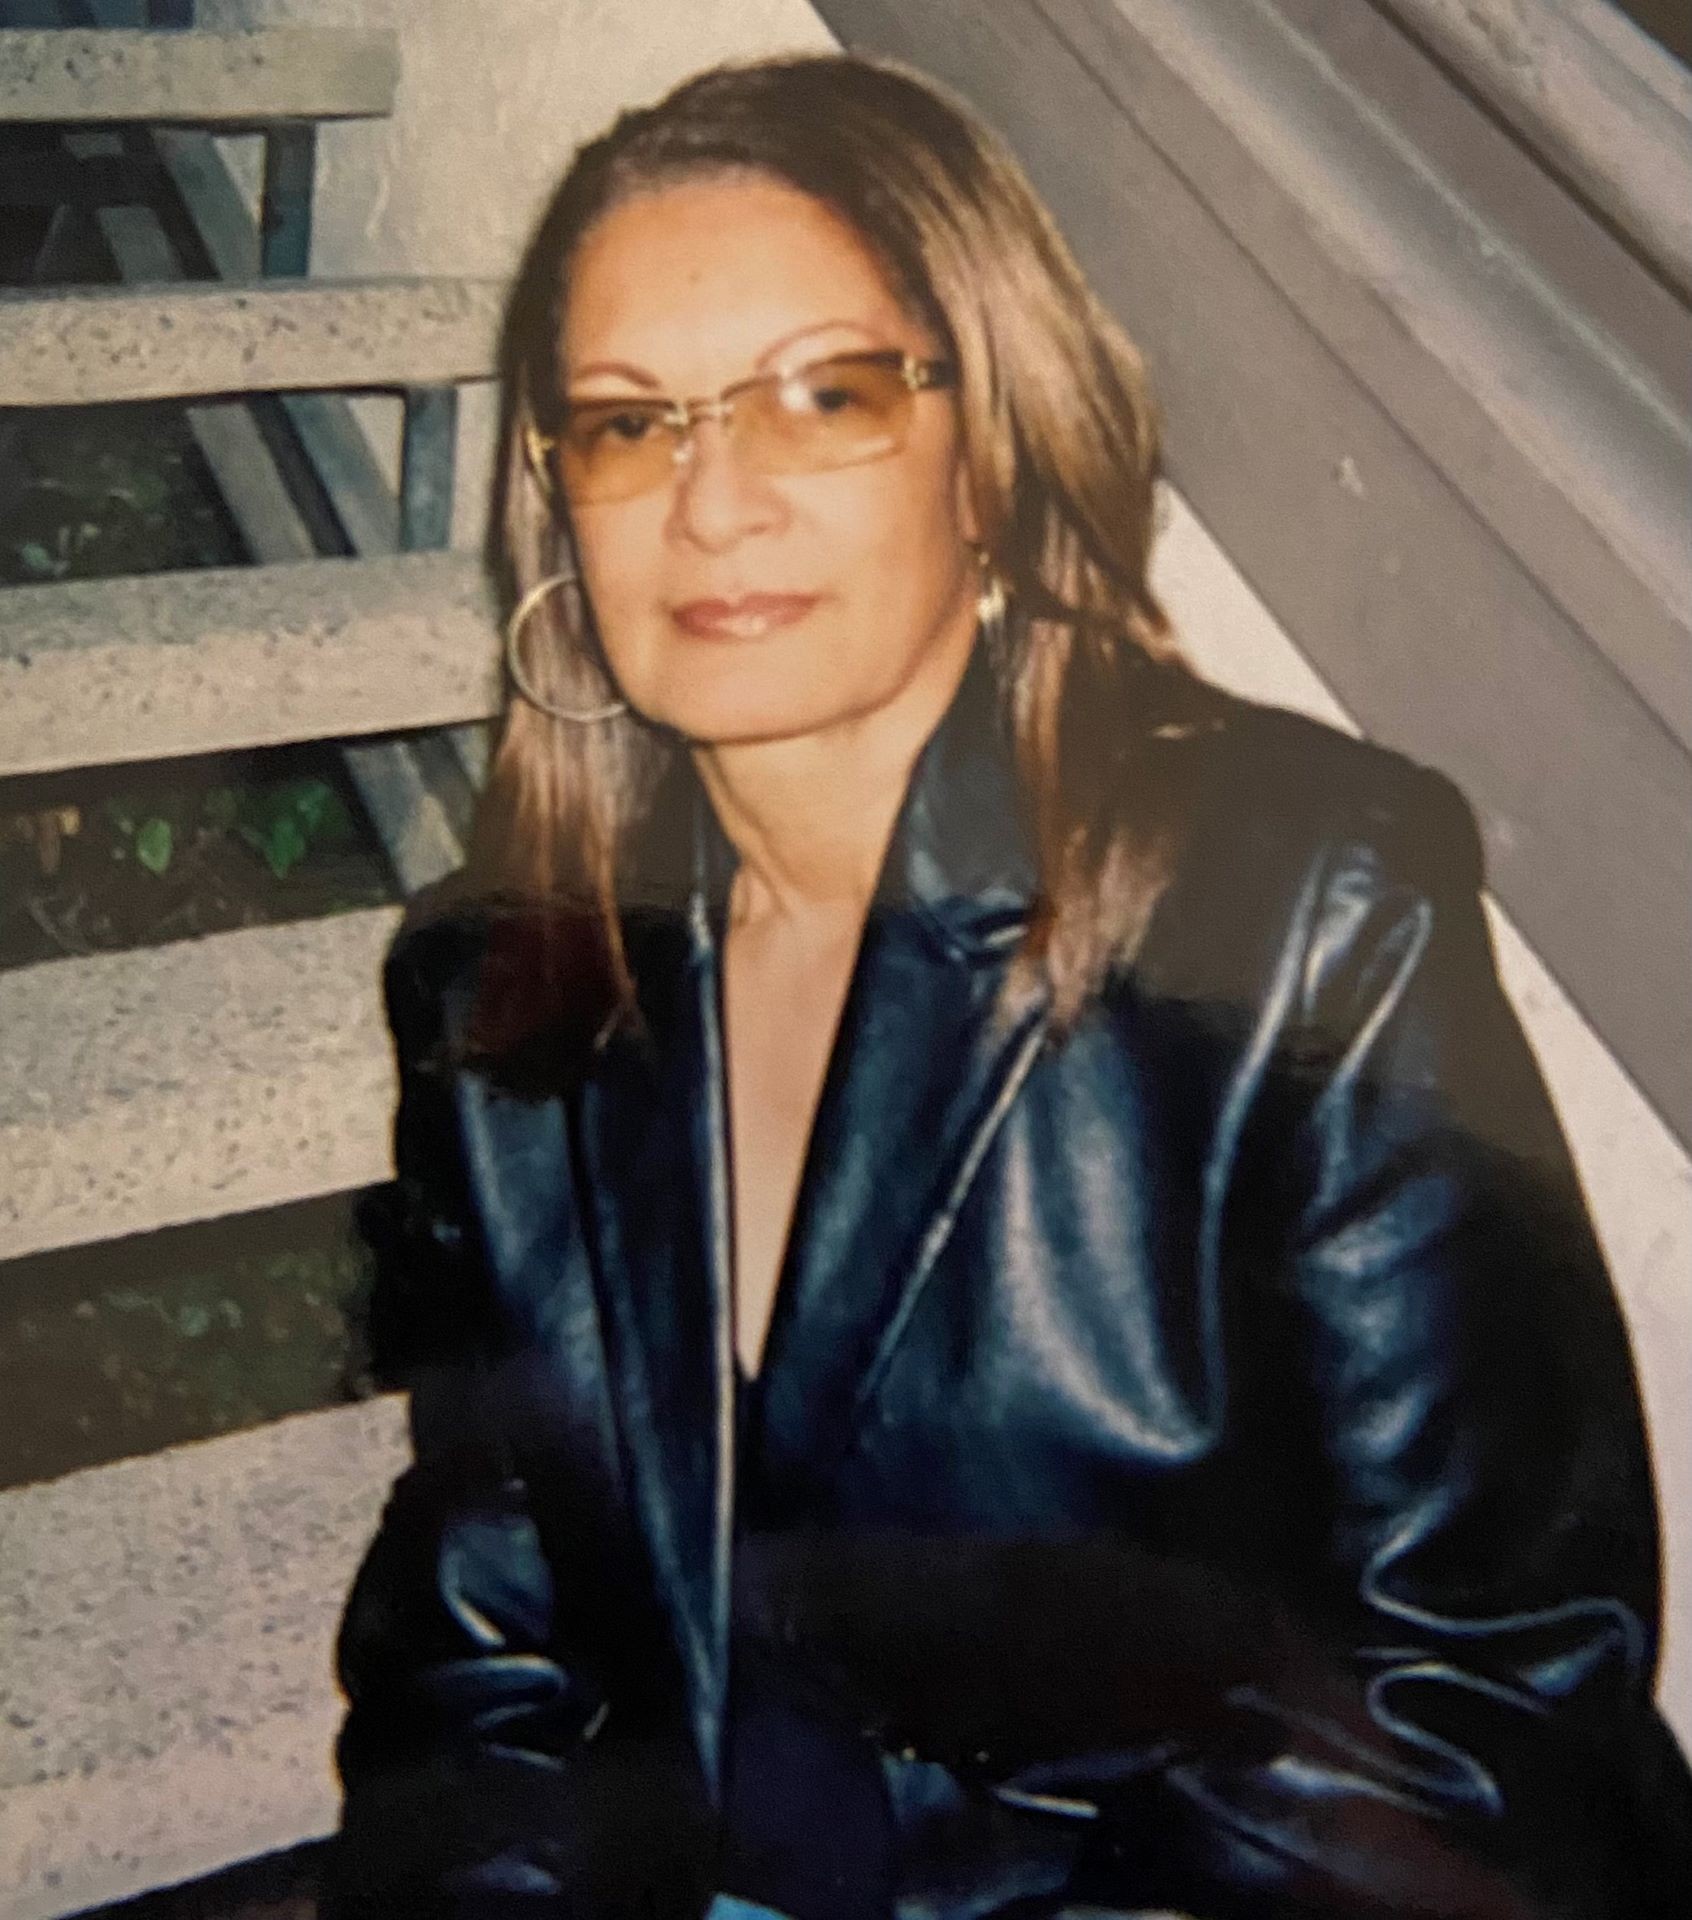 A woman wearing glasses sits on a staircase in a leather blazer